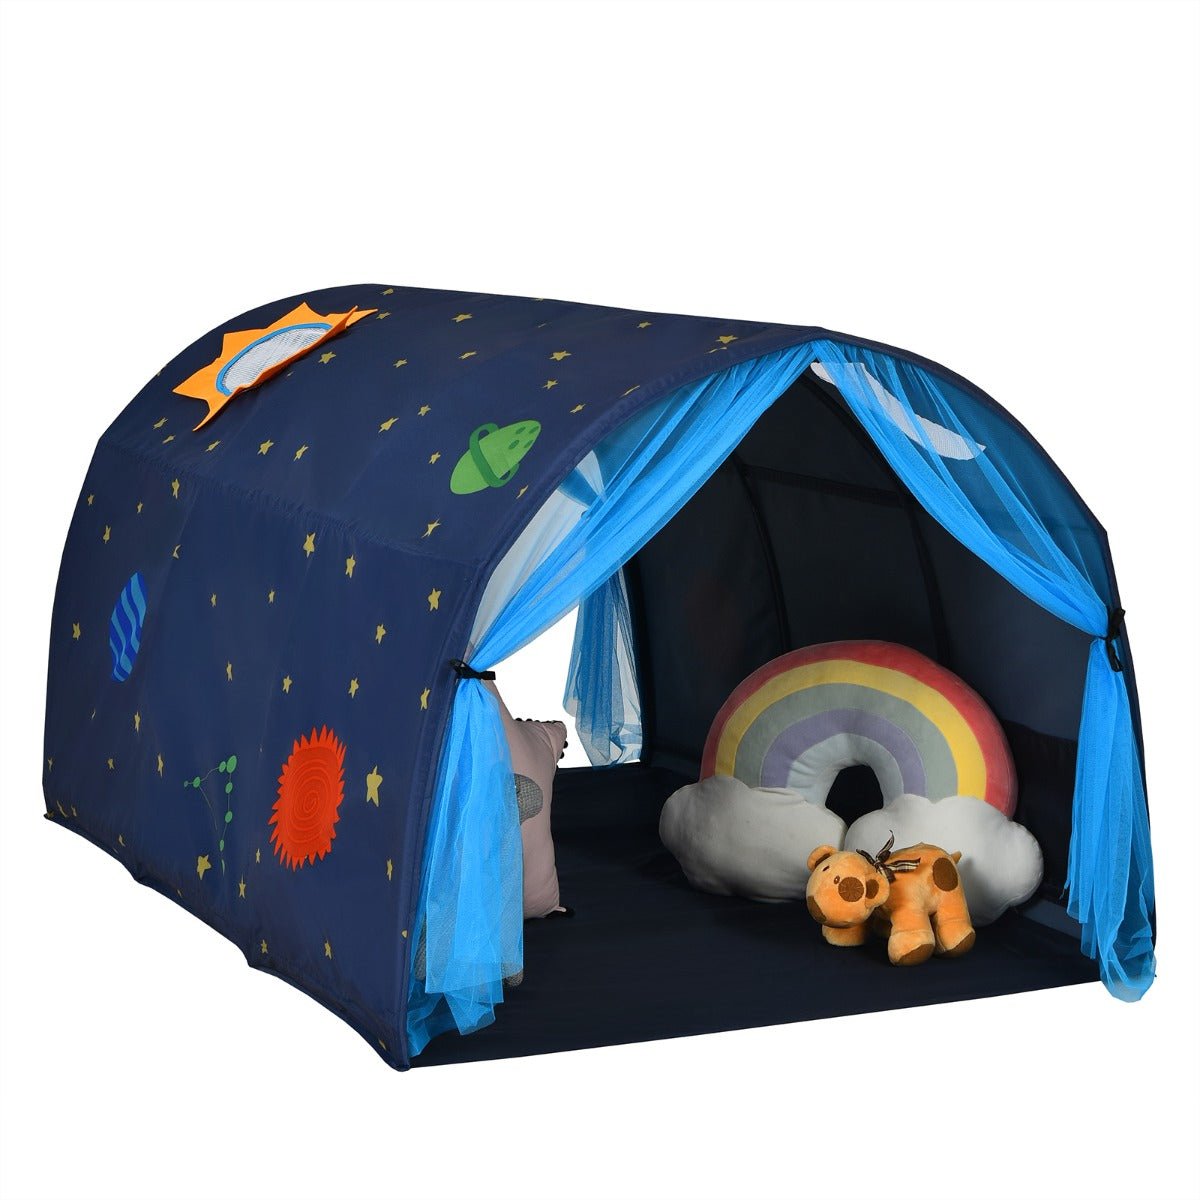 Twin Dream Adventure: Sleeping Tent Playhouse with Carry Bag